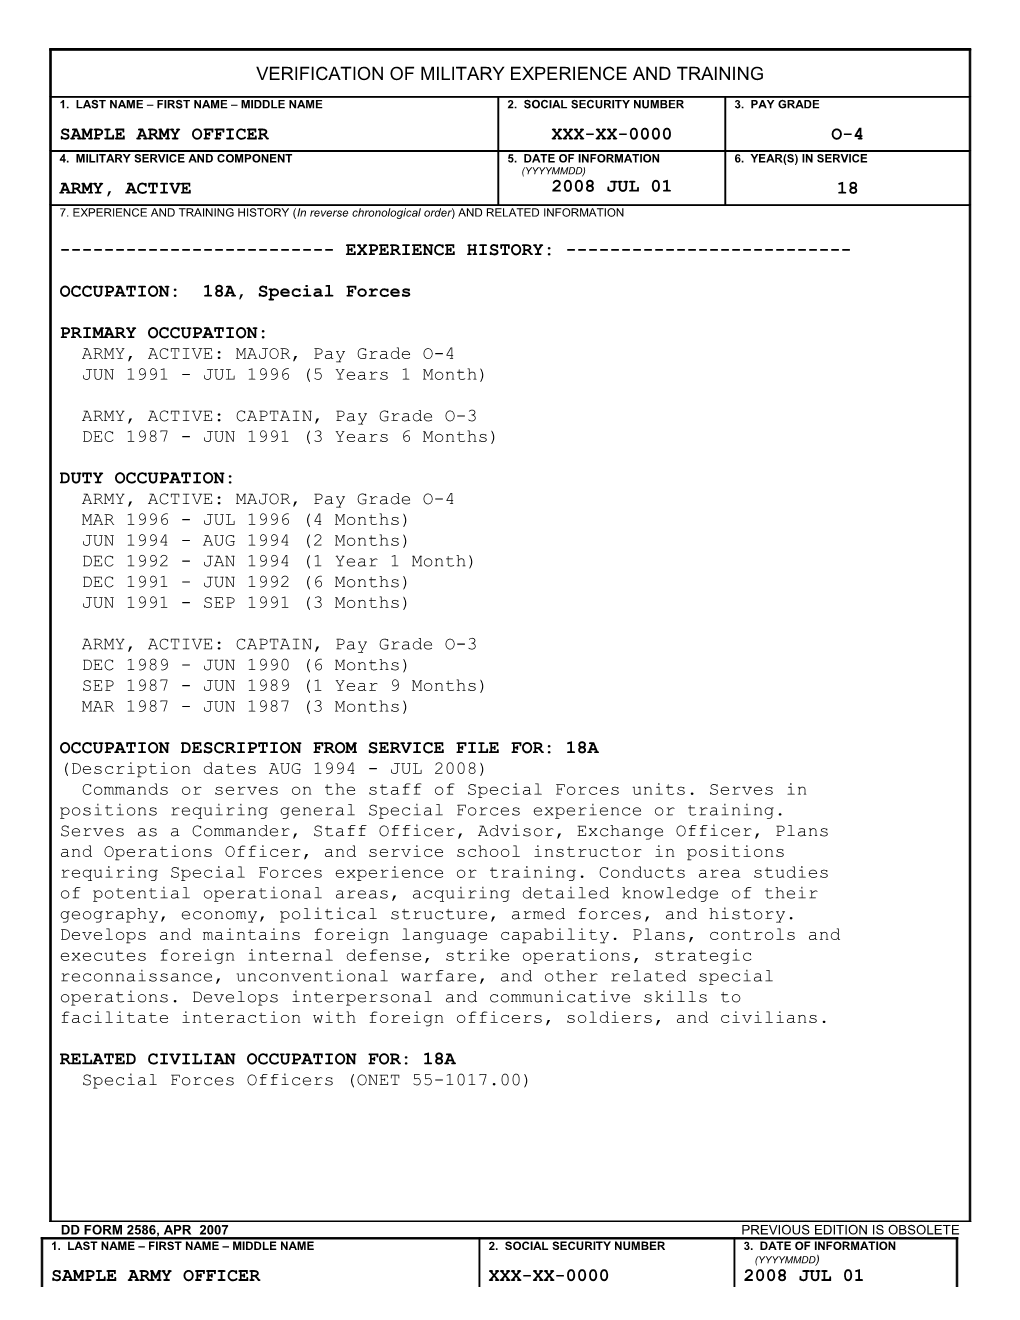 Dd Form 2586, Apr 2007 Previous Edition Is Obsolete